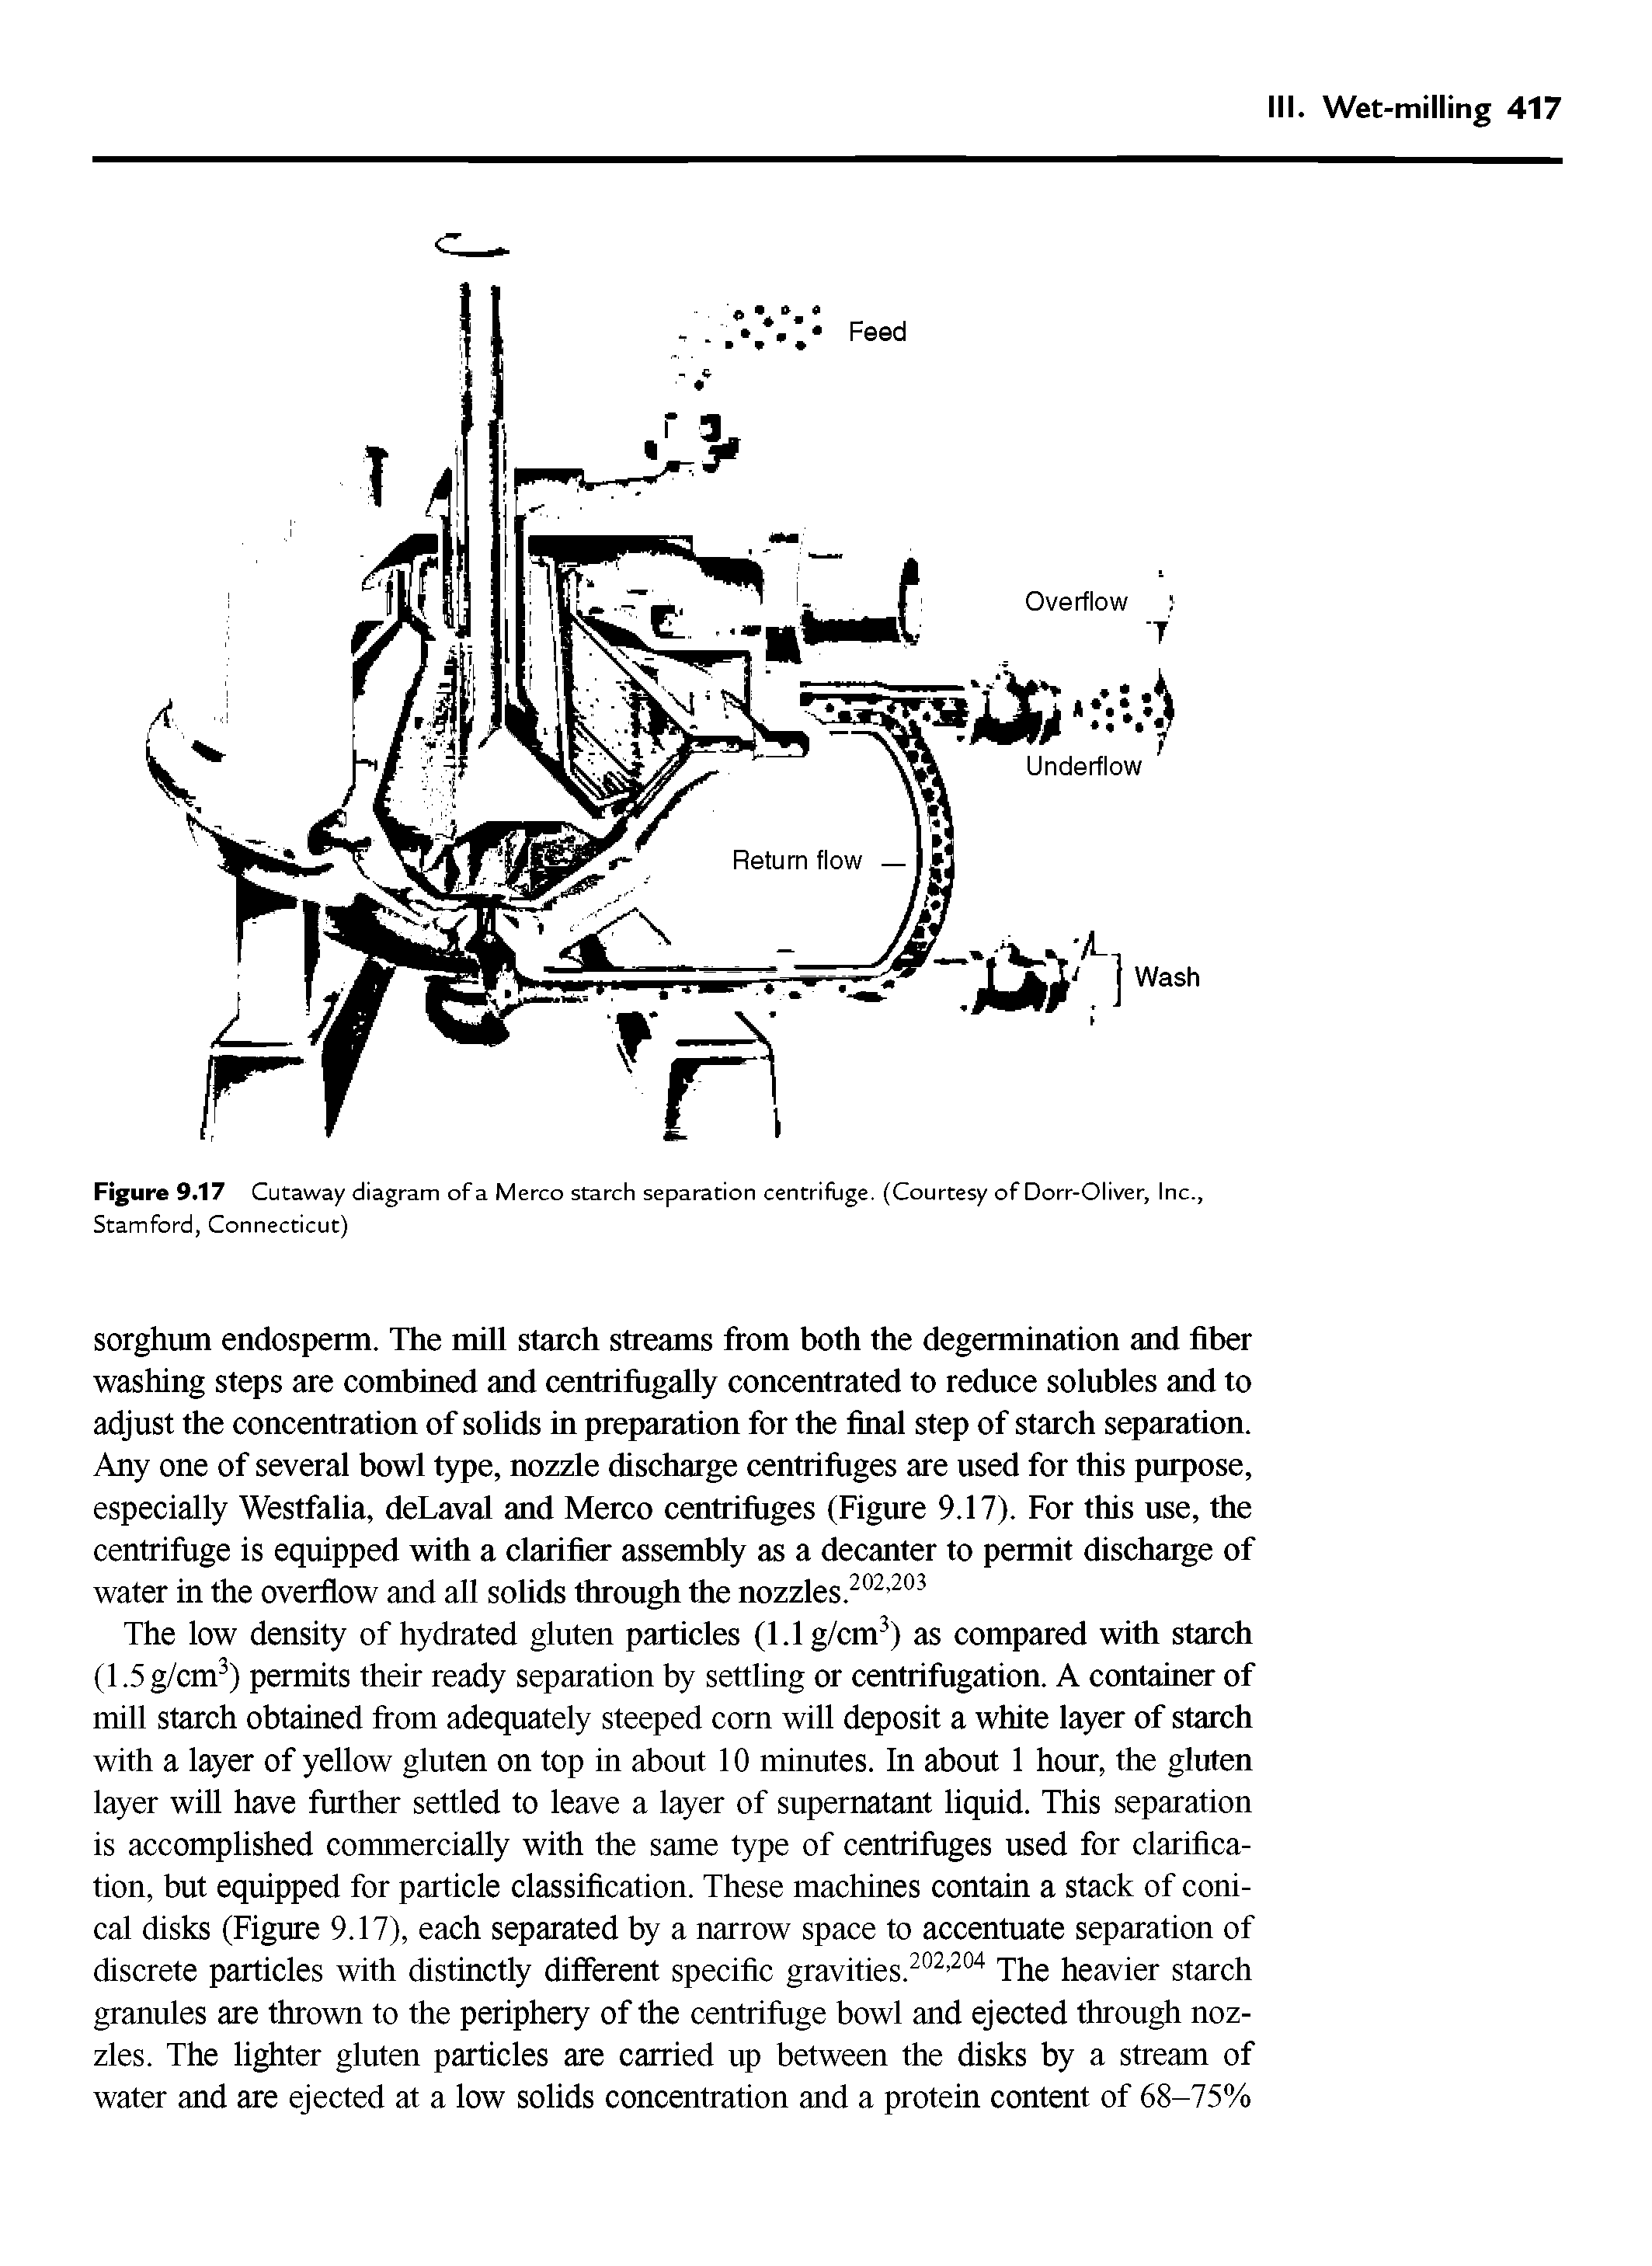 Figure 9.17 Cutaway diagram of a Merco starch separation centrifuge. (Courtesy of Dorr-Oliver, Inc., Stamford, Connecticut)...